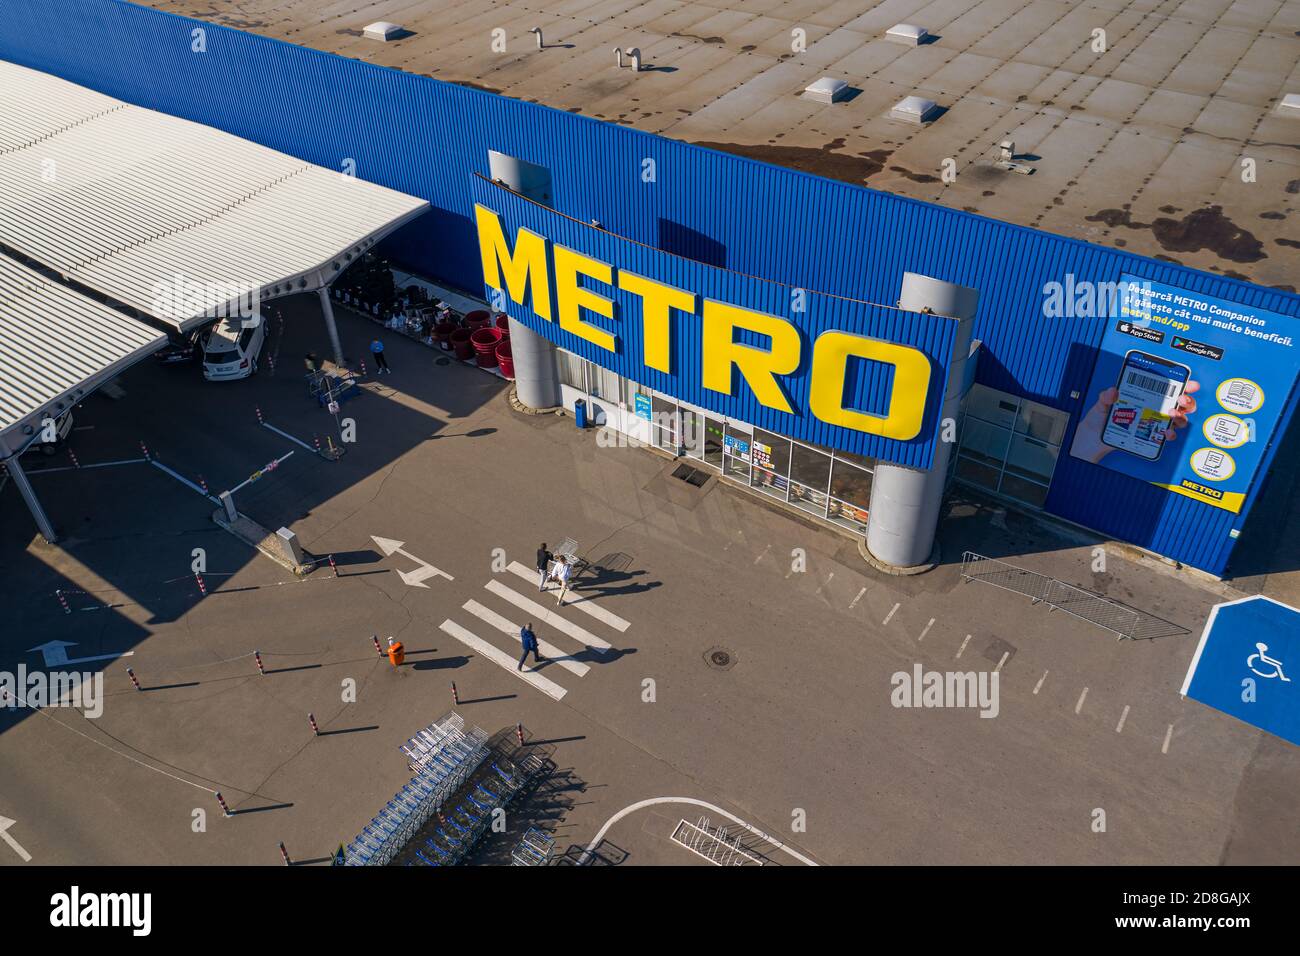 Metro retail store, large shopping mall of household and food goods with parking, aerial view, copyspace Stock Photo